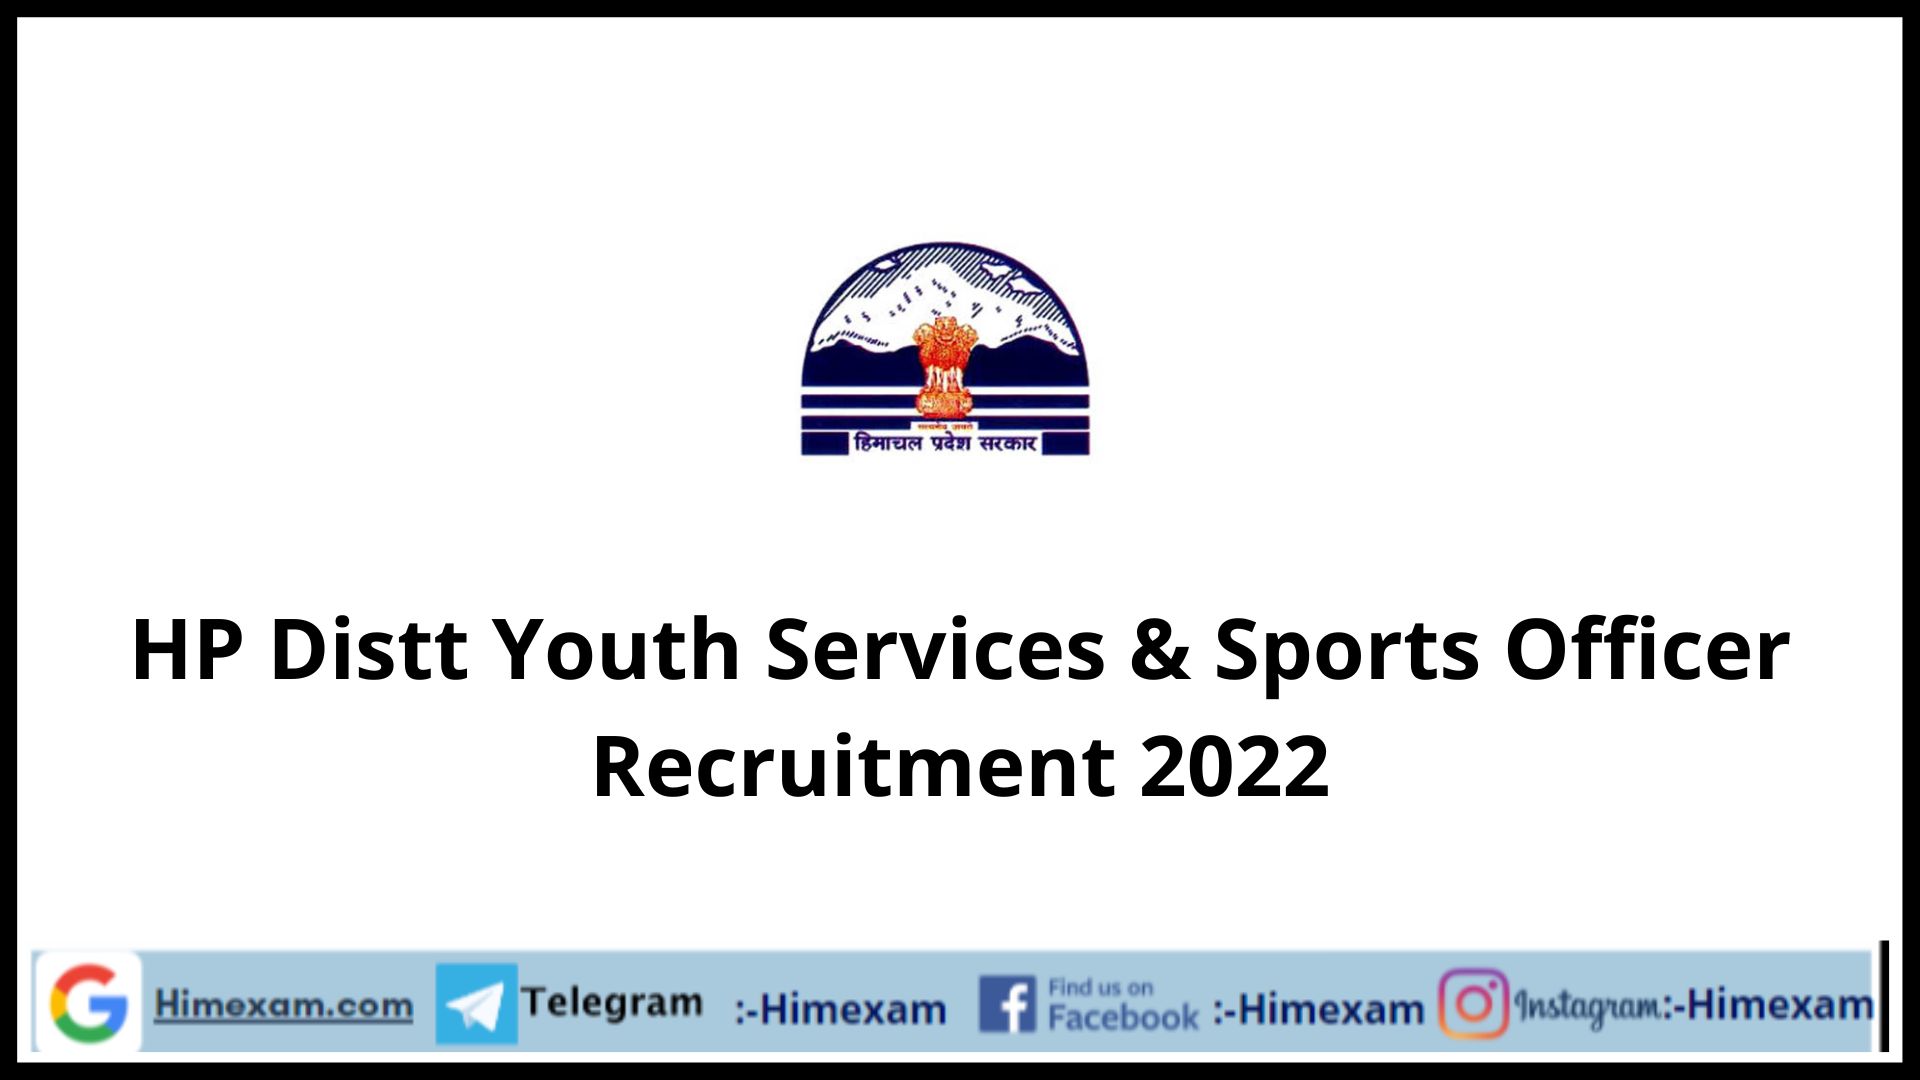 HP Distt Youth Services & Sports Officer Recruitment 2022